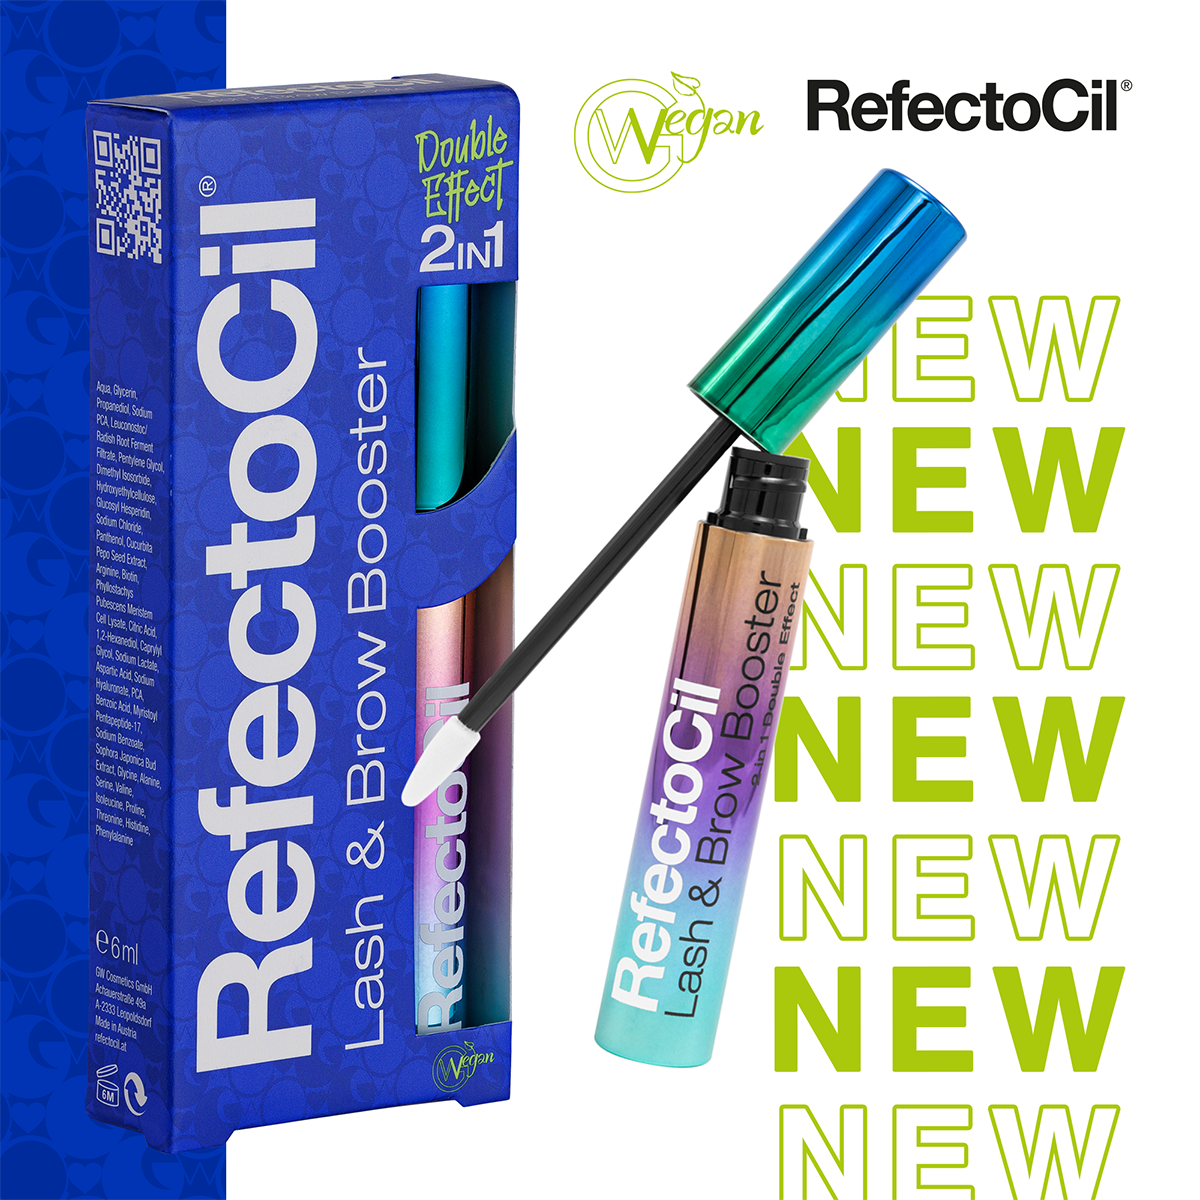 Enjoy a spa-day at home with the RefectoCil Care range for brows and lashes 3